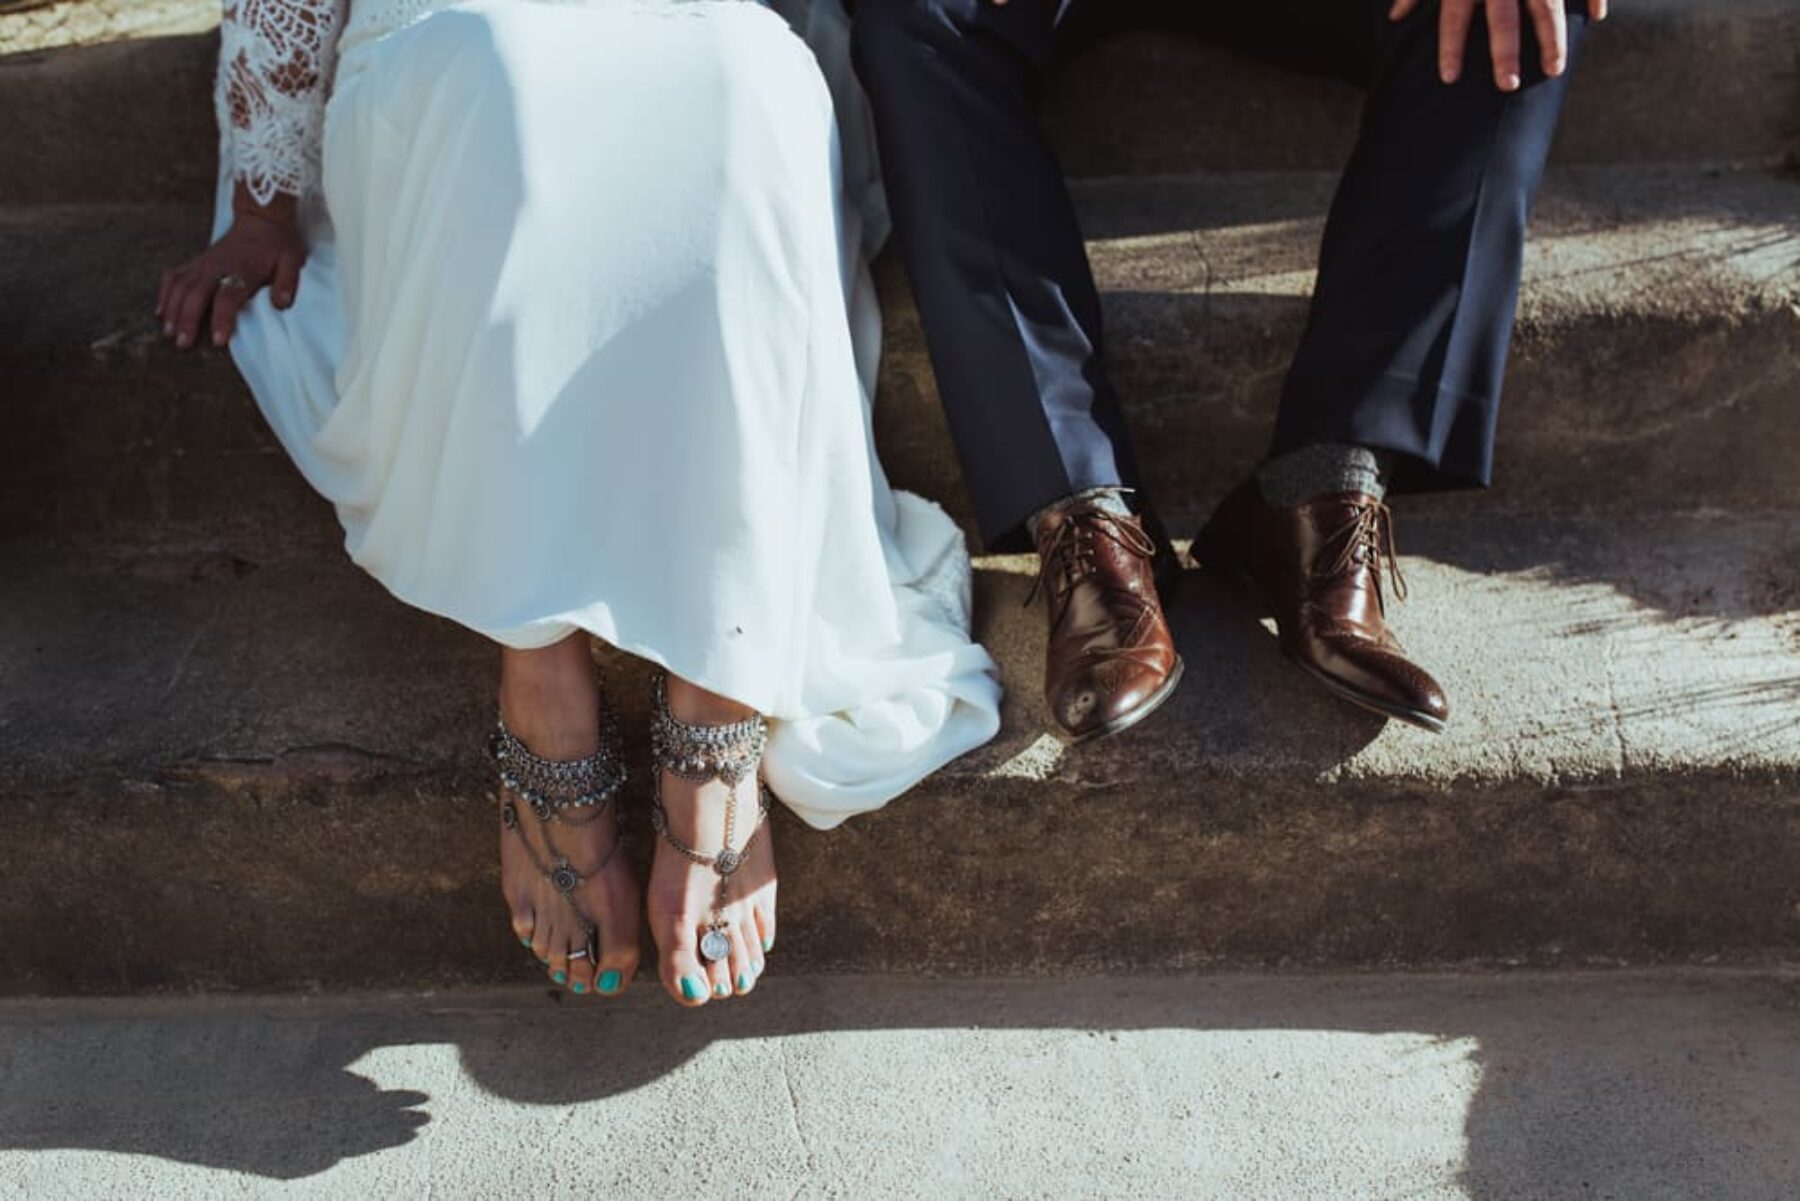 Boho Blue Mountains wedding / Photography by Towards the Moon